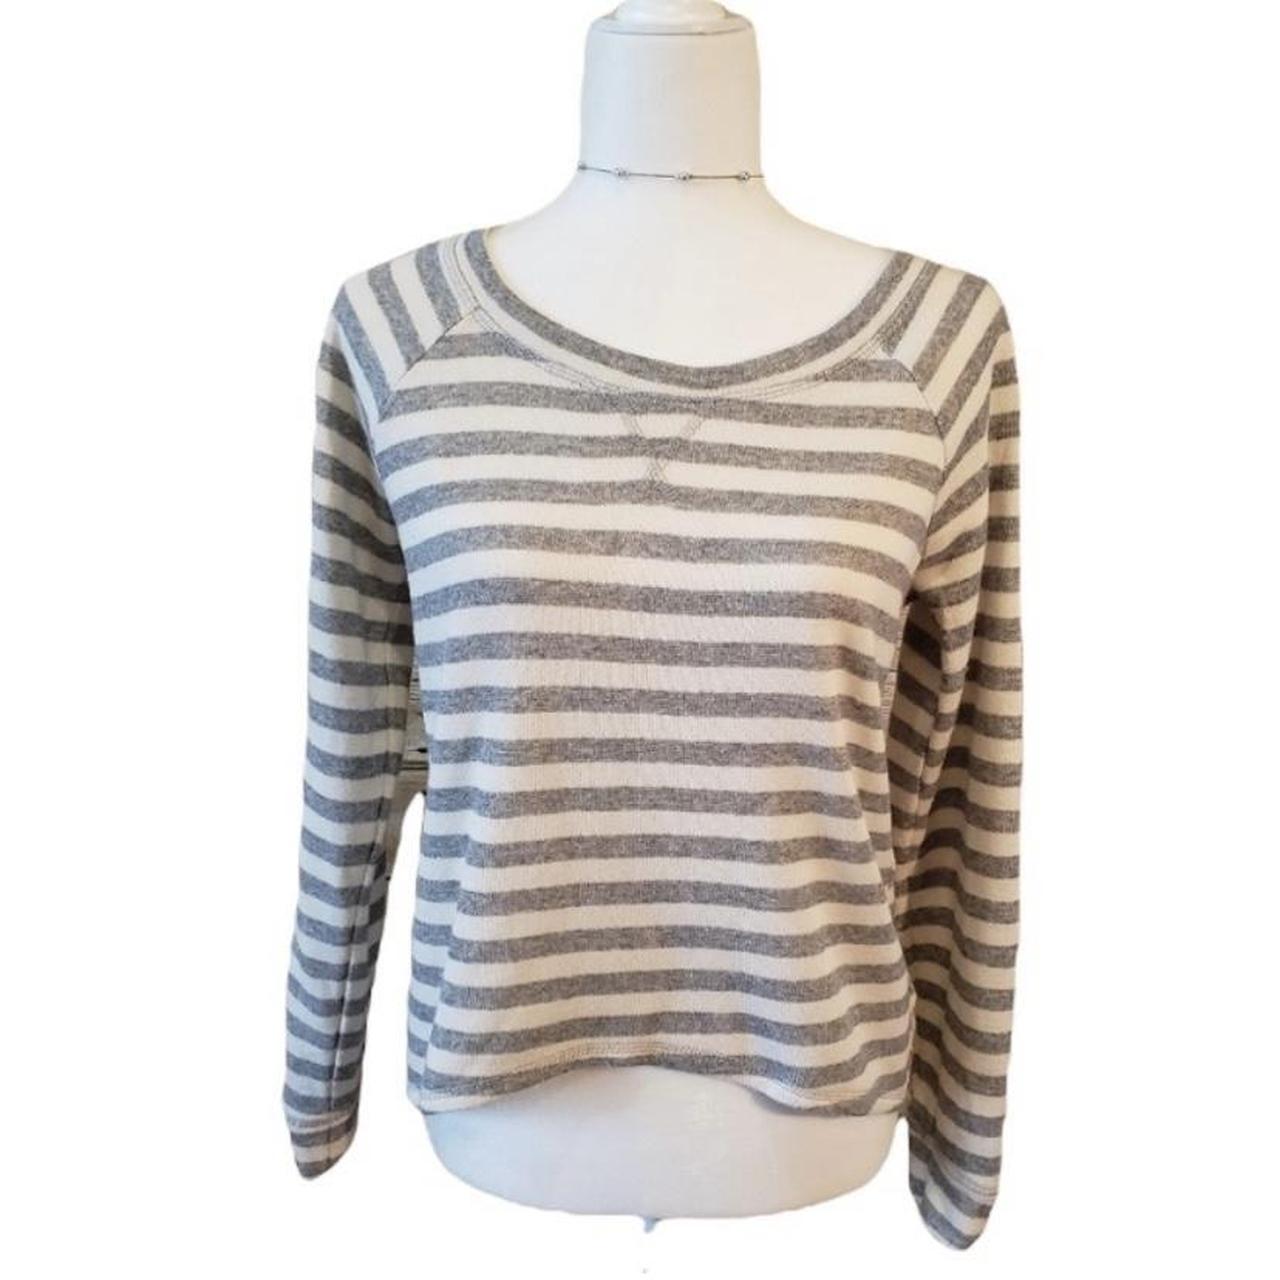 Get cozy with this stylish Mossimo sweatshirt that